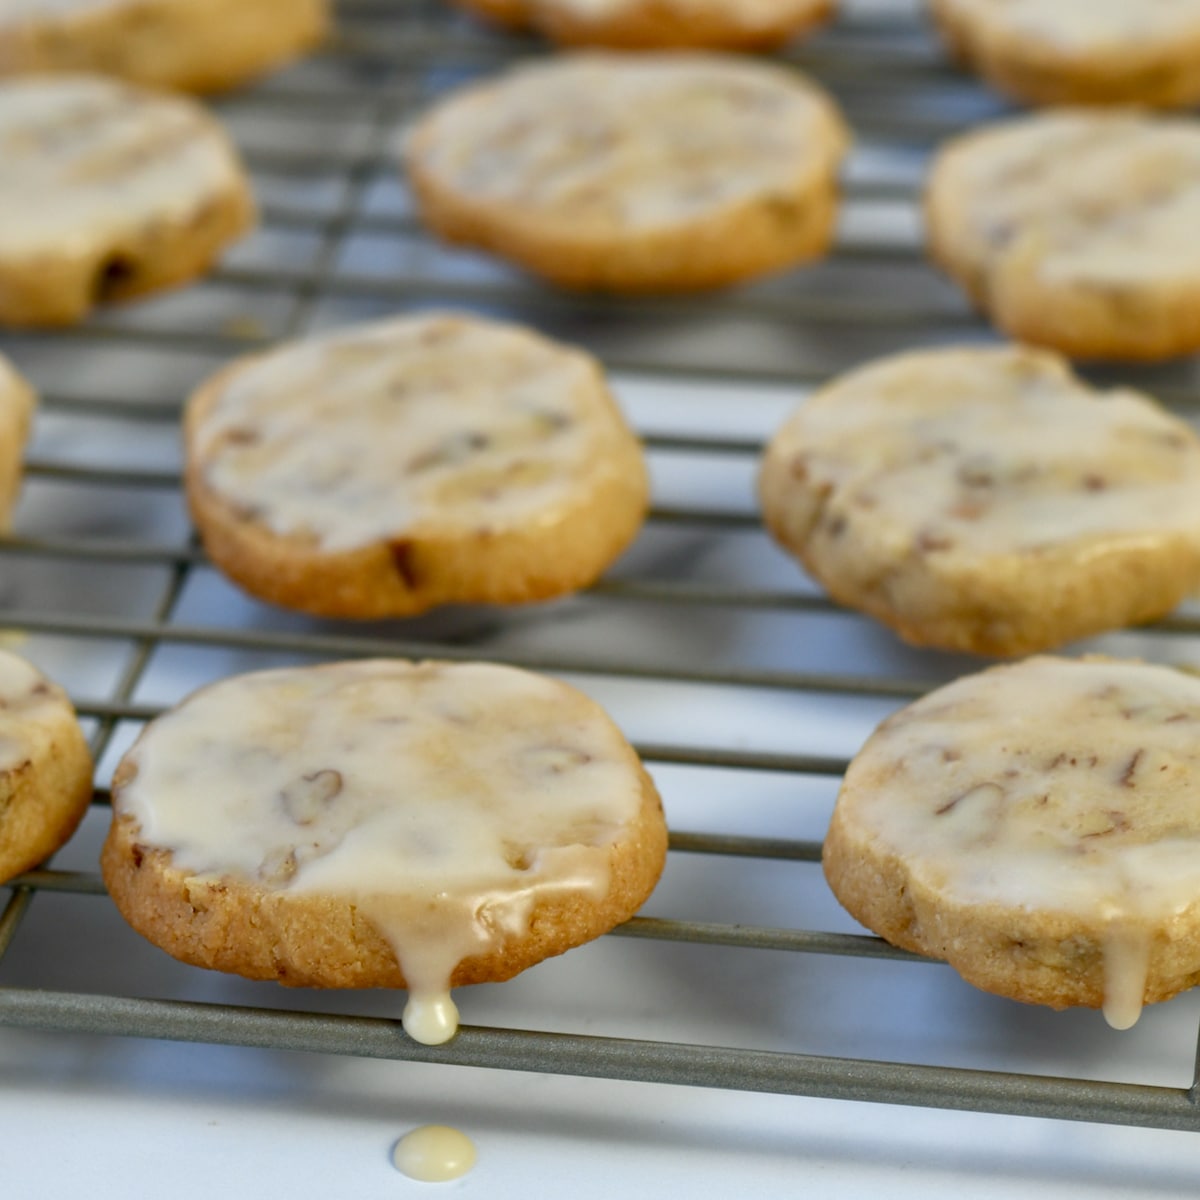 Maple glaze icing dripping off pecan shortbread cookie on wire rack.